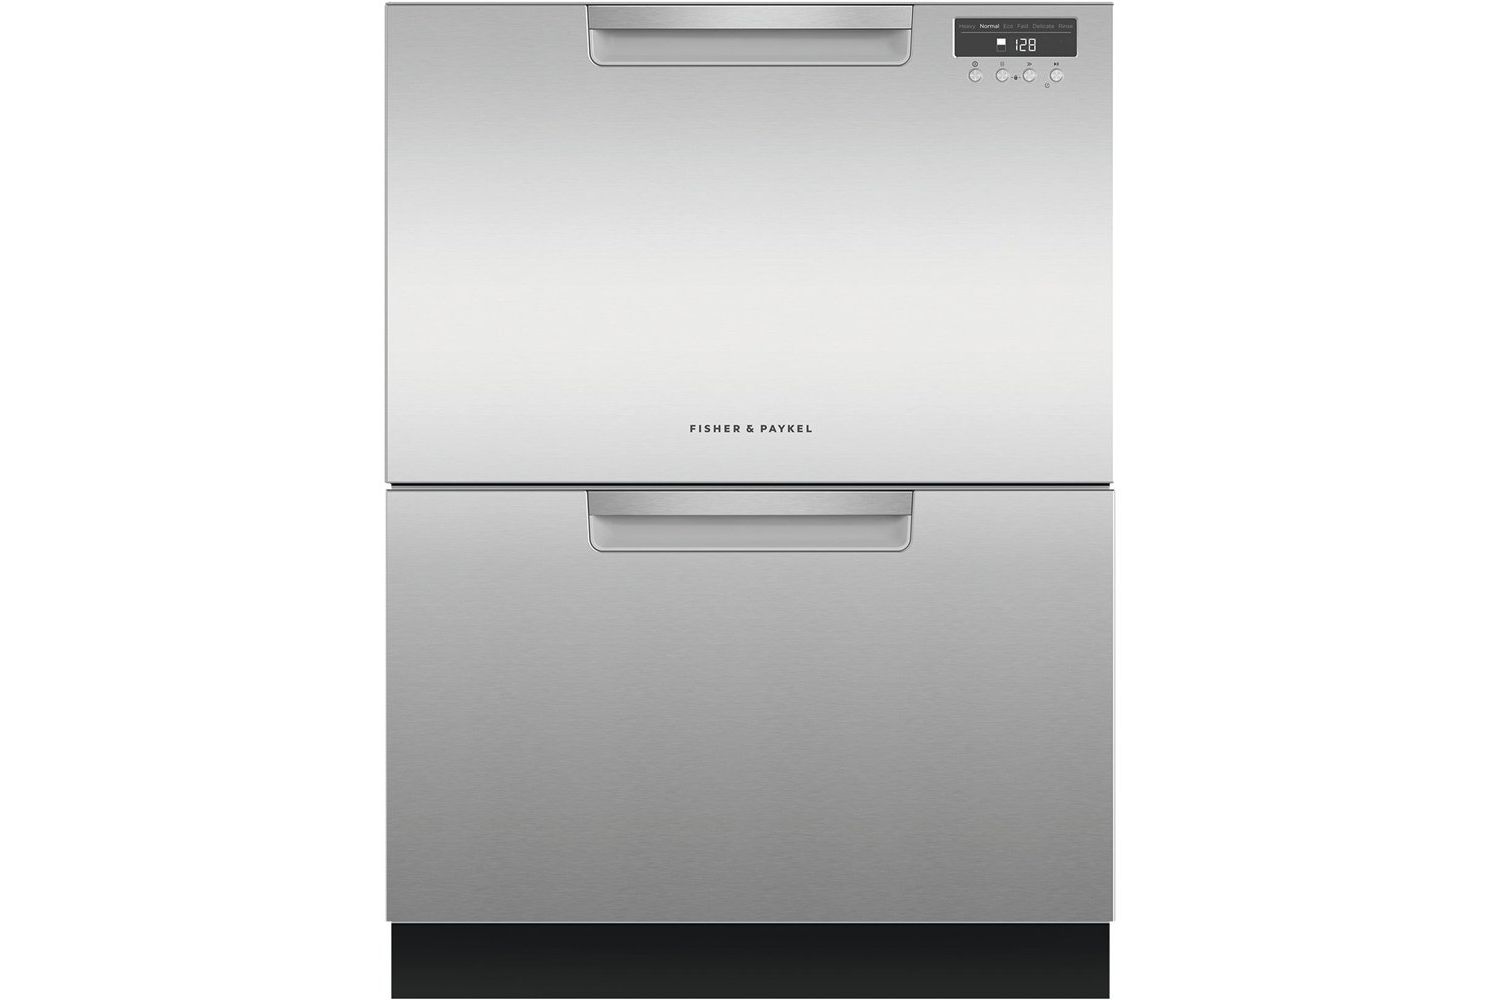 The Fisher & Paykel 24" Front Control Built-In Drawer Dishwasher on a white background.